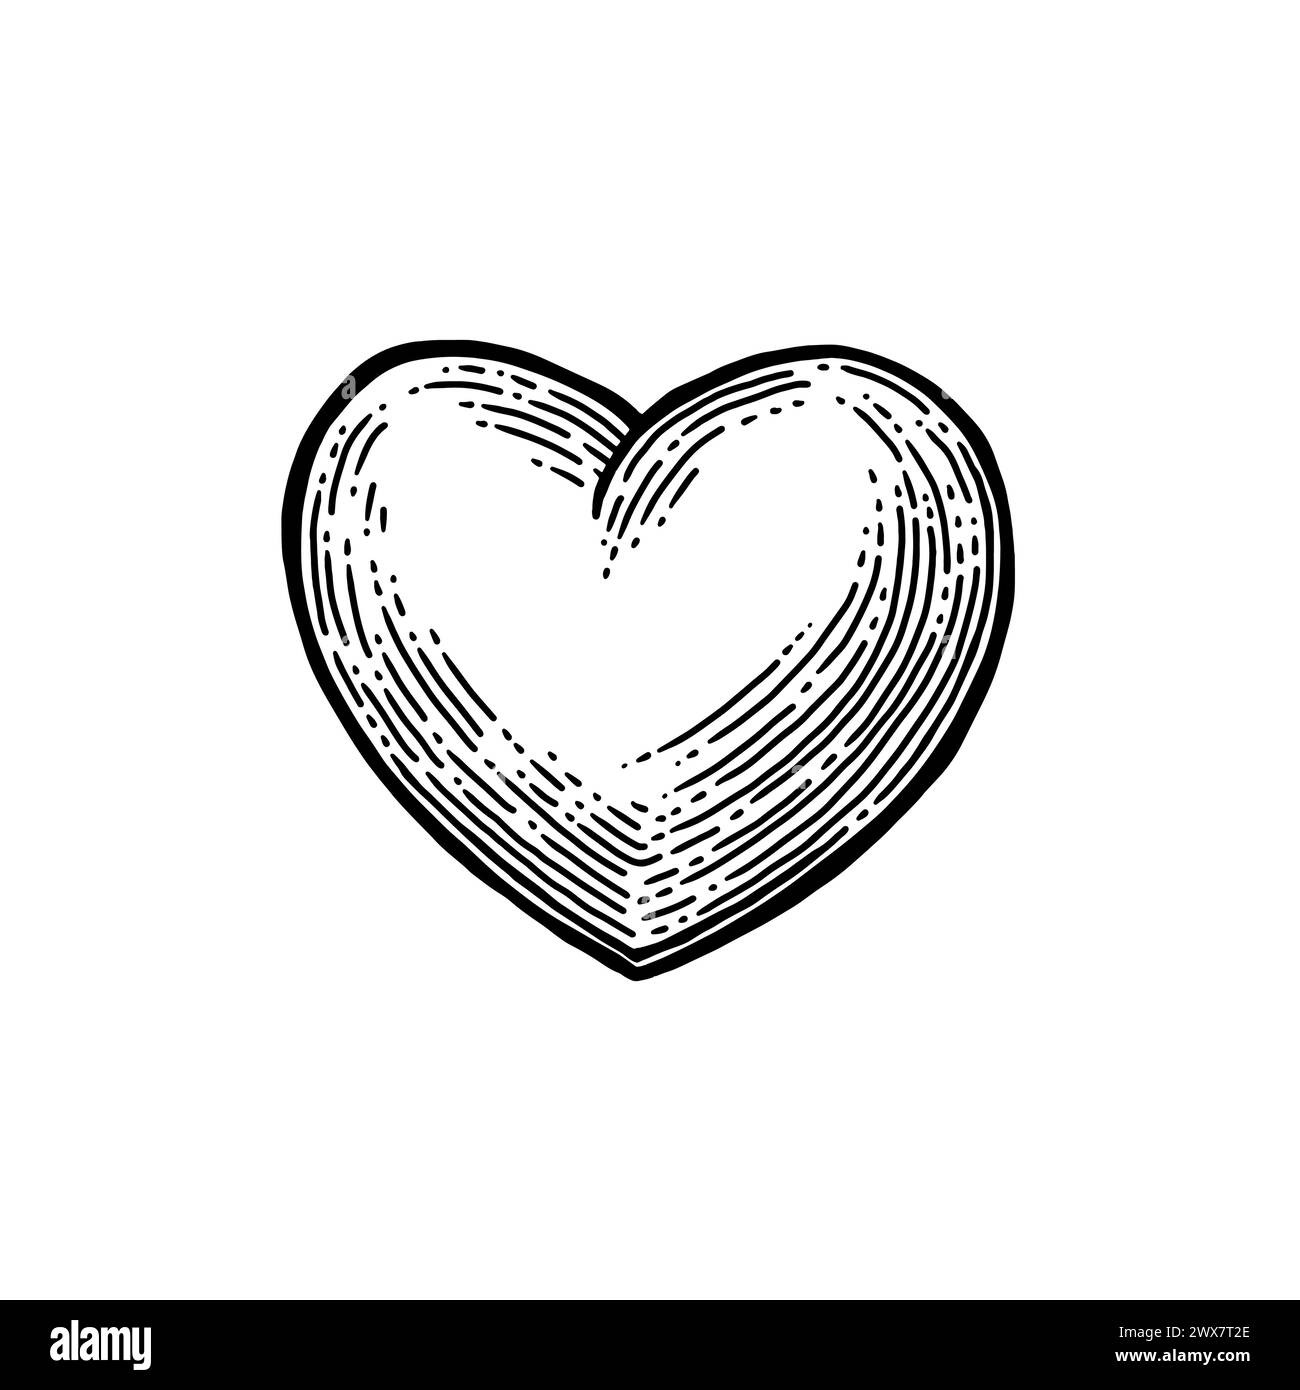 Heart in style vintage engraving illustration isolated on a white background. For web, greeting card, poster, infographic. Valentine's day concept. Stock Vector